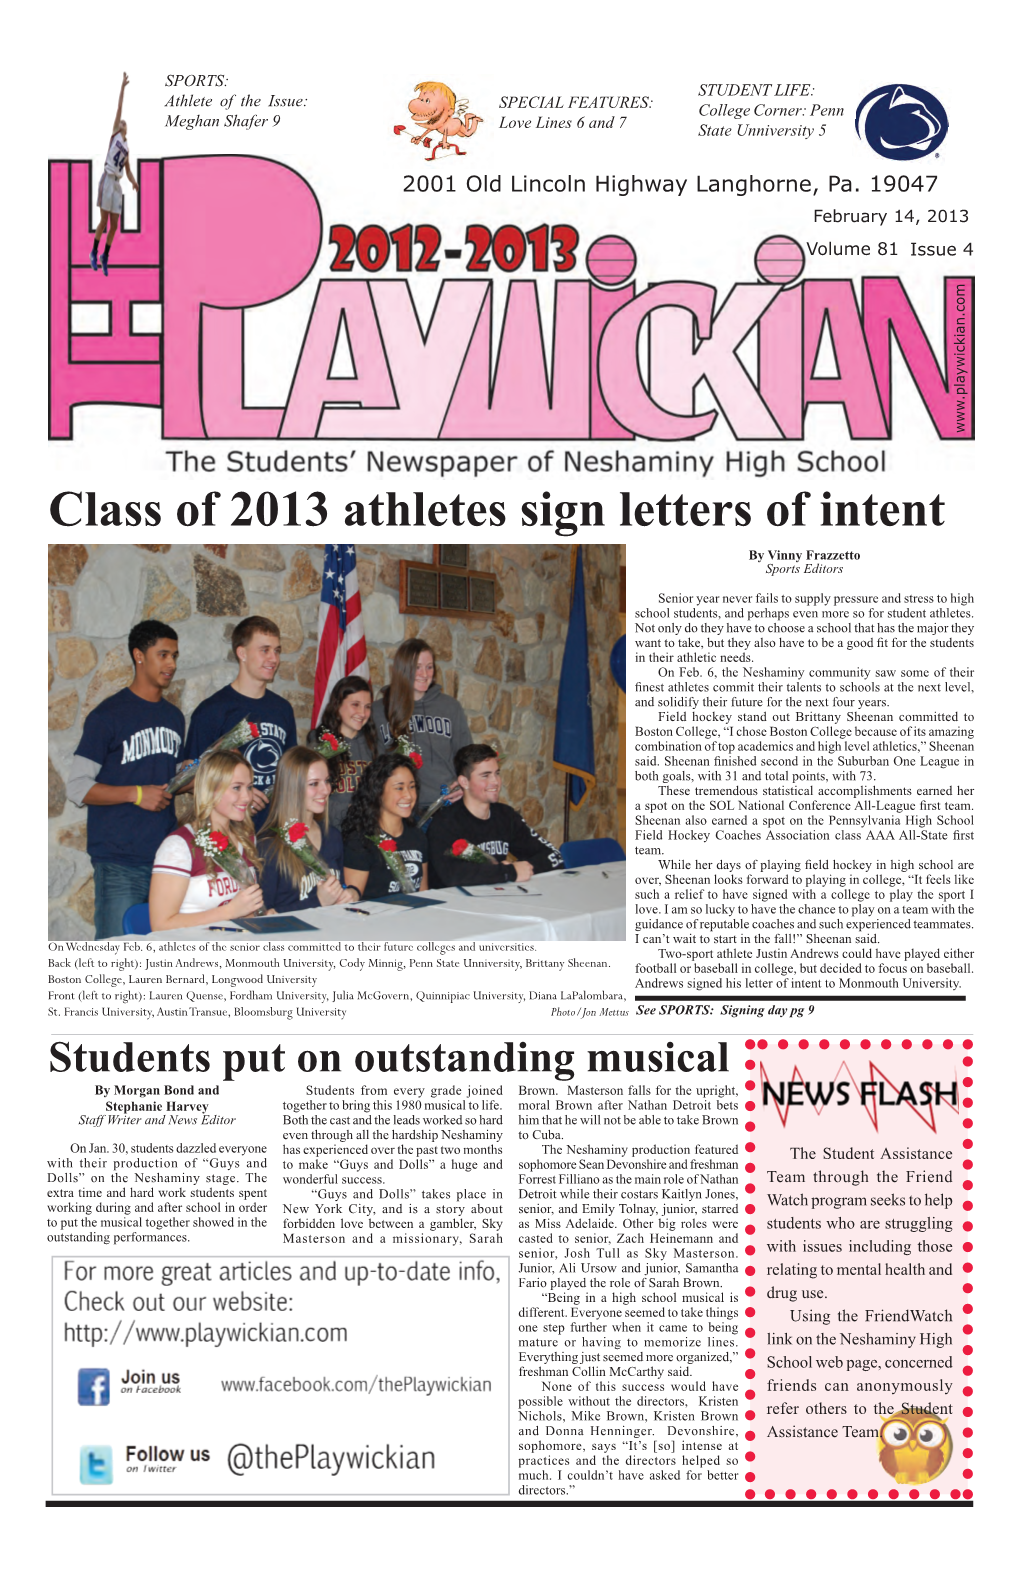 Class of 2013 Athletes Sign Letters of Intent by Vinny Frazzetto Sports Editors